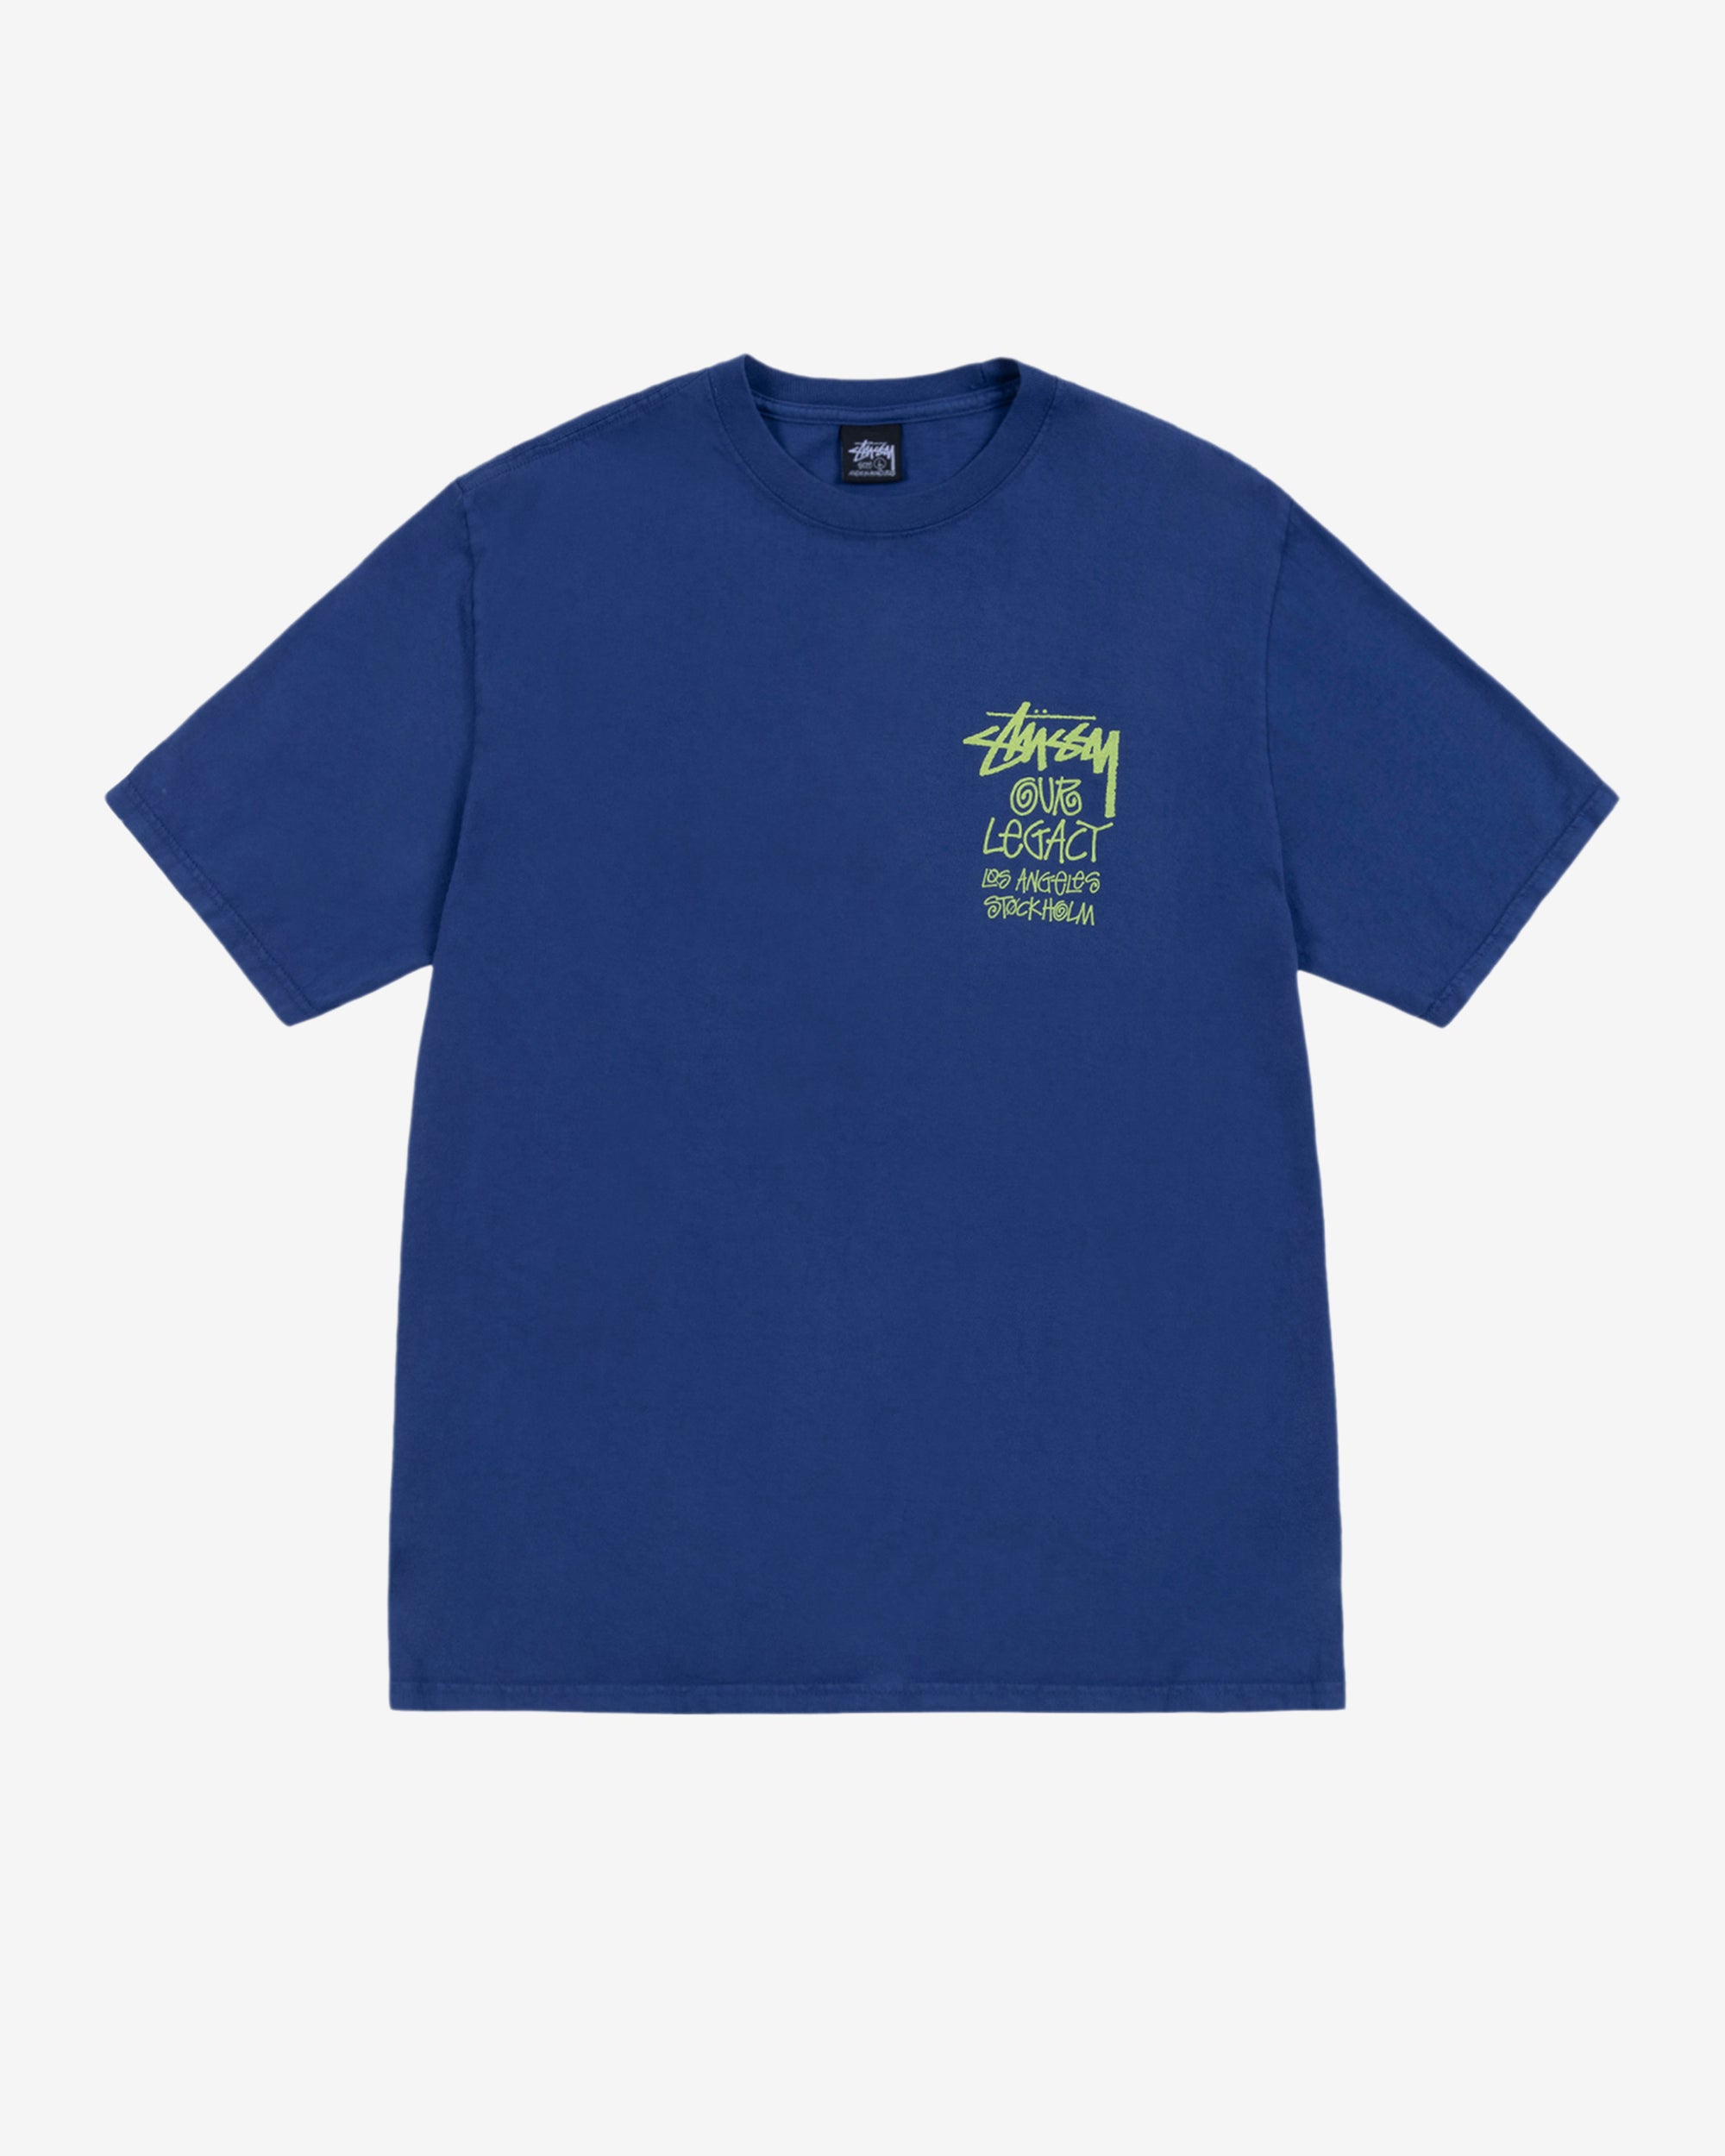 Stüssy - Our Legacy Men's Surfman Pig. Dyed Tee - (Blueberry) | Dover ...